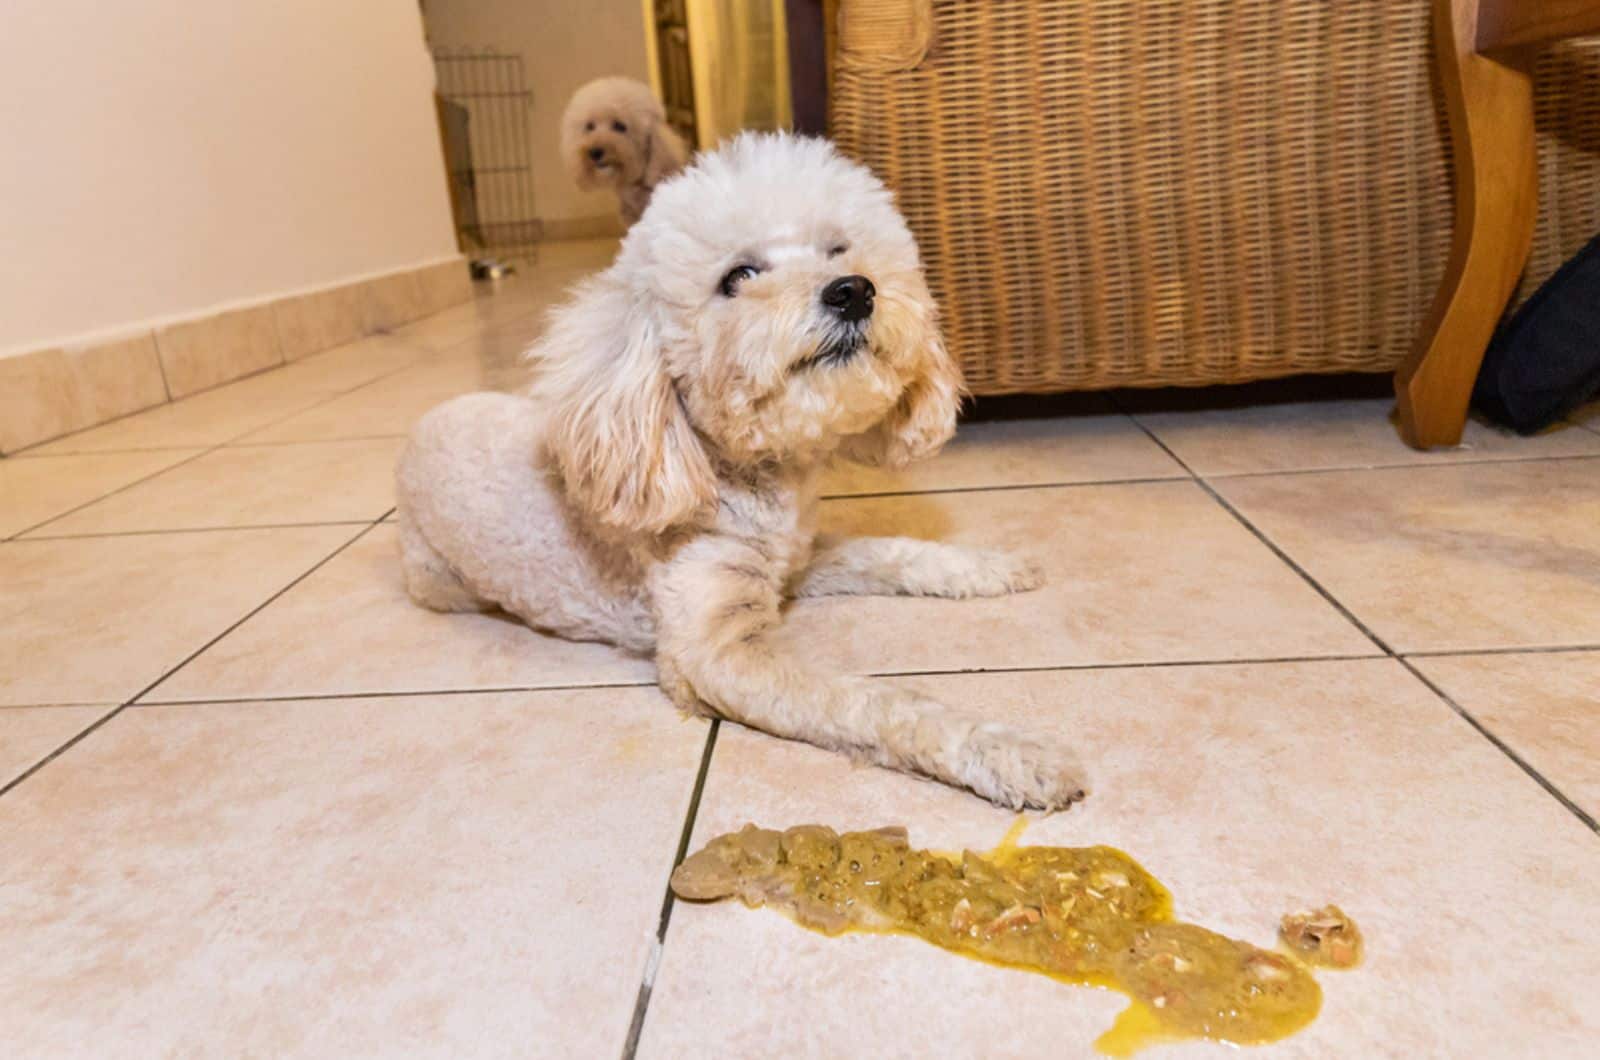 sick unwell poodle dog with vomit on the floor